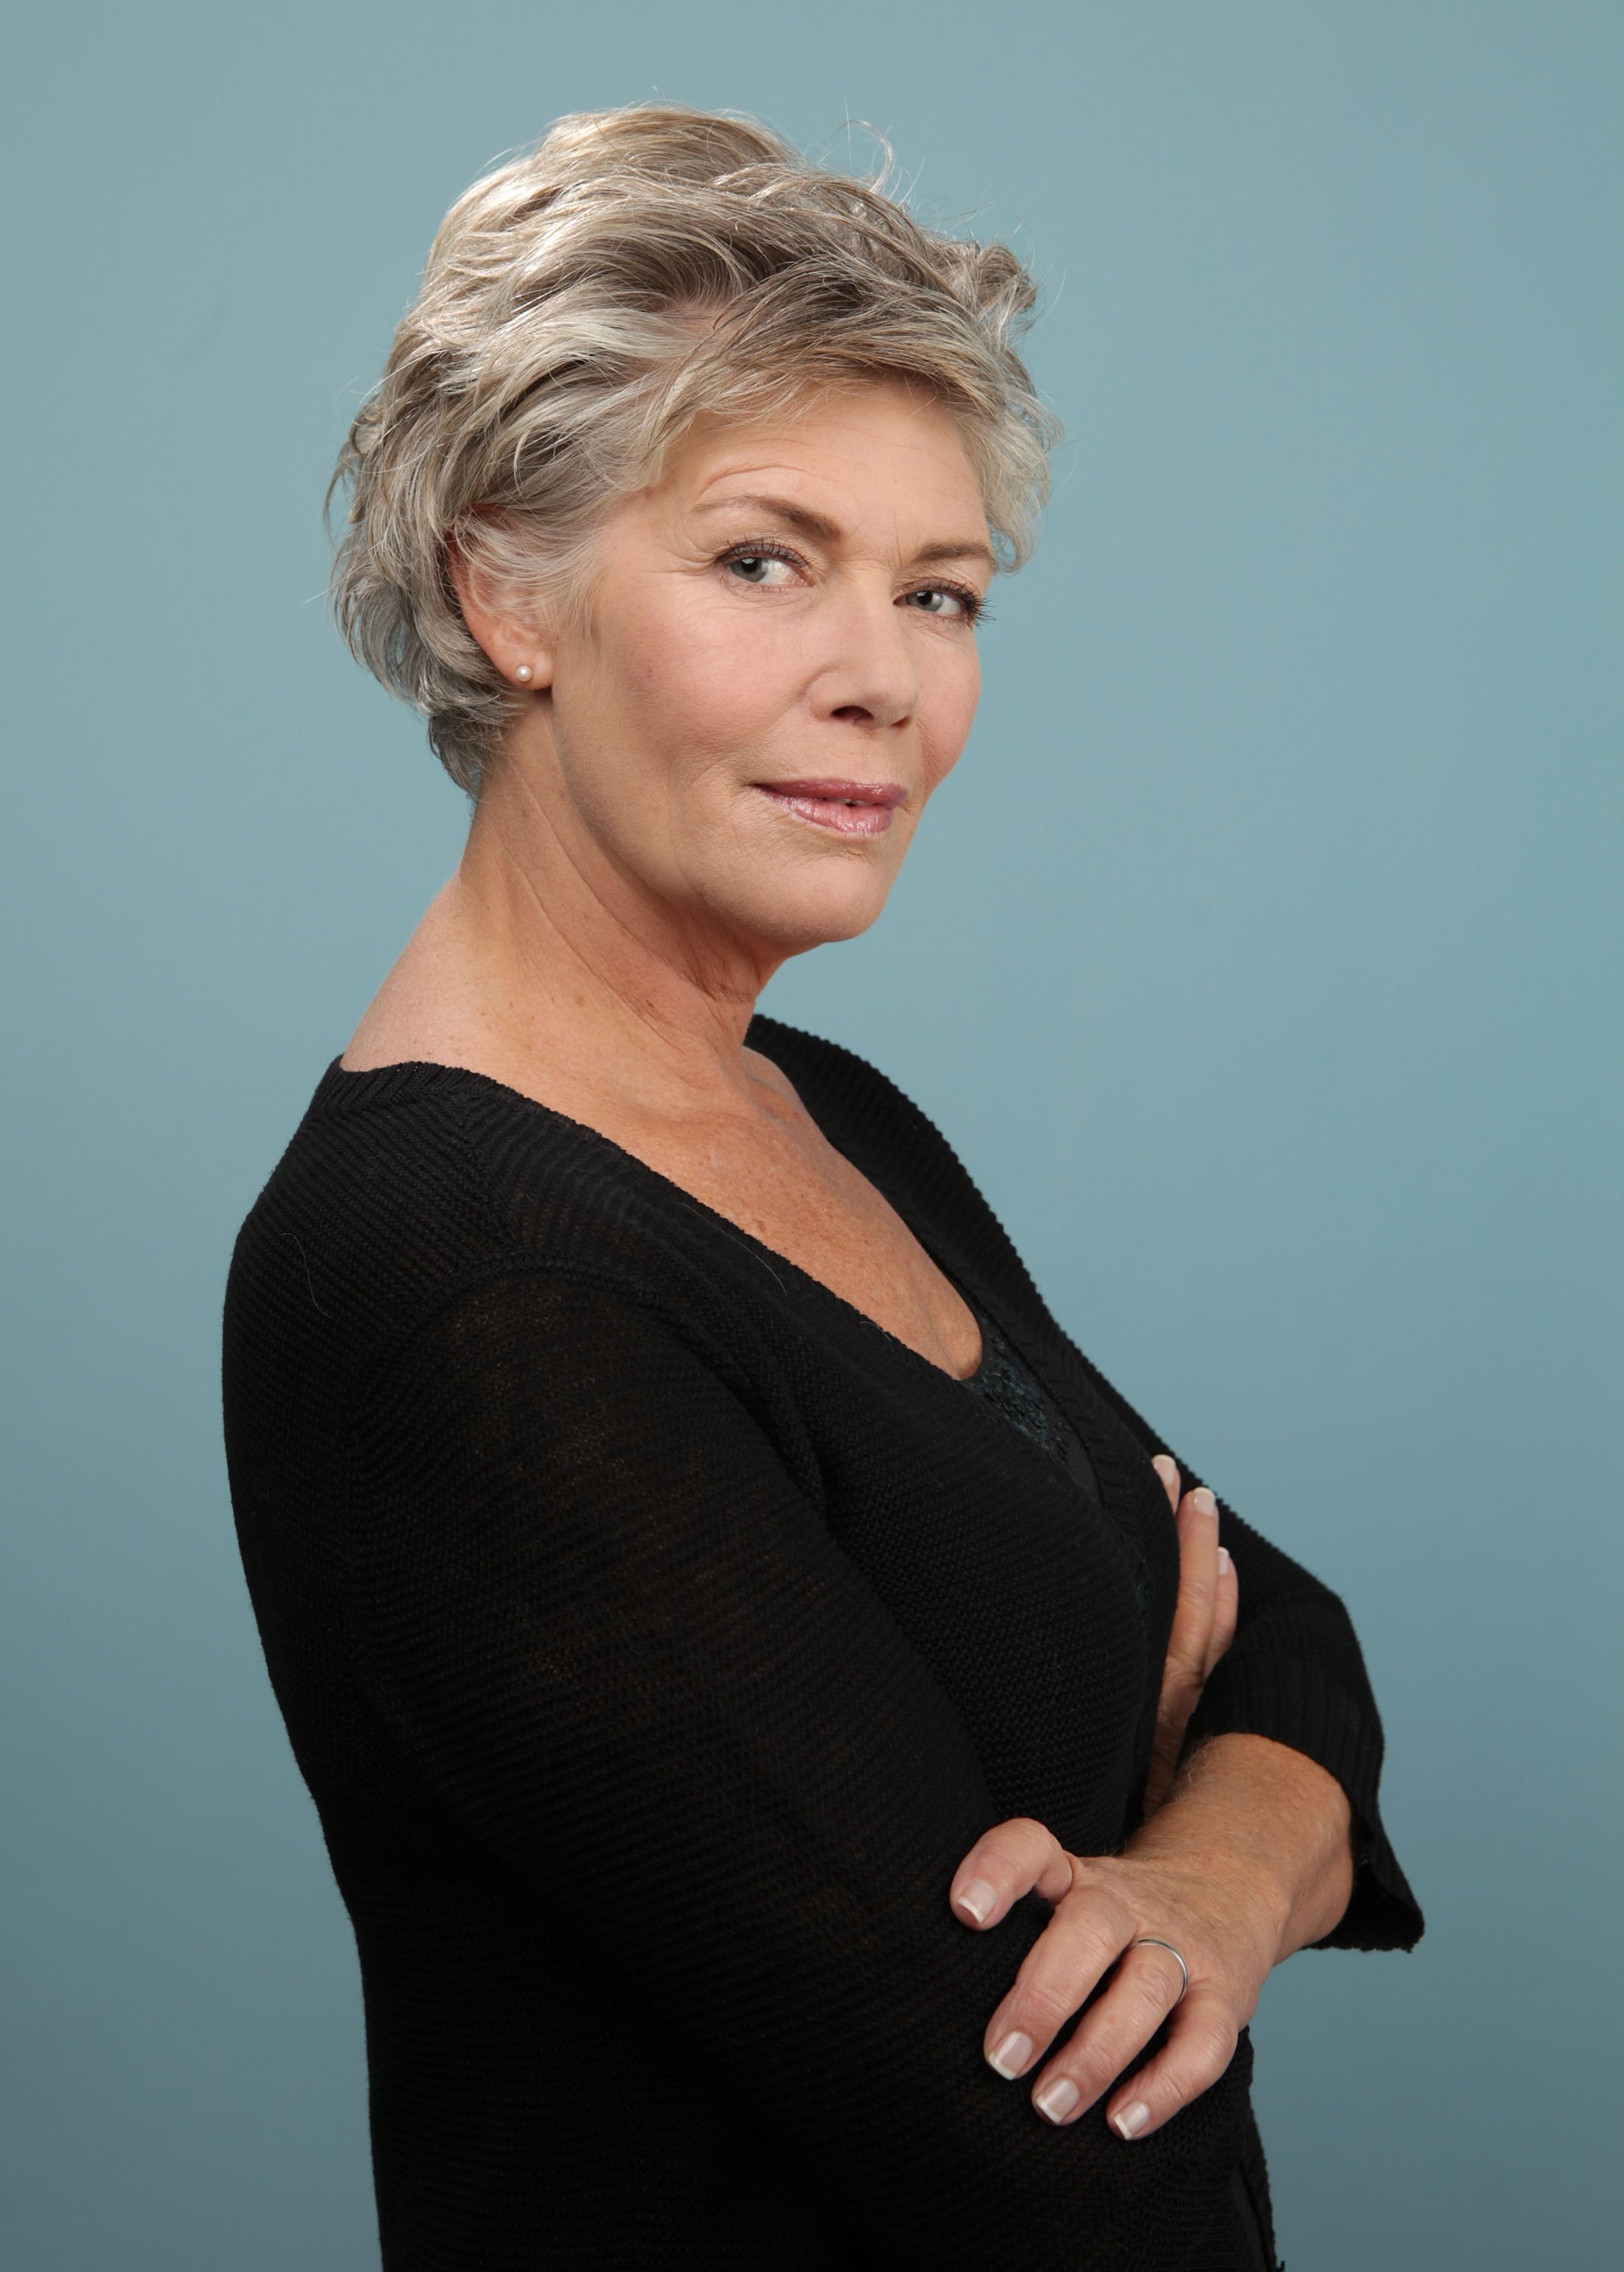 Kelly McGillis on September 17, 2010 in Toronto, Canada | Source: Getty Images 